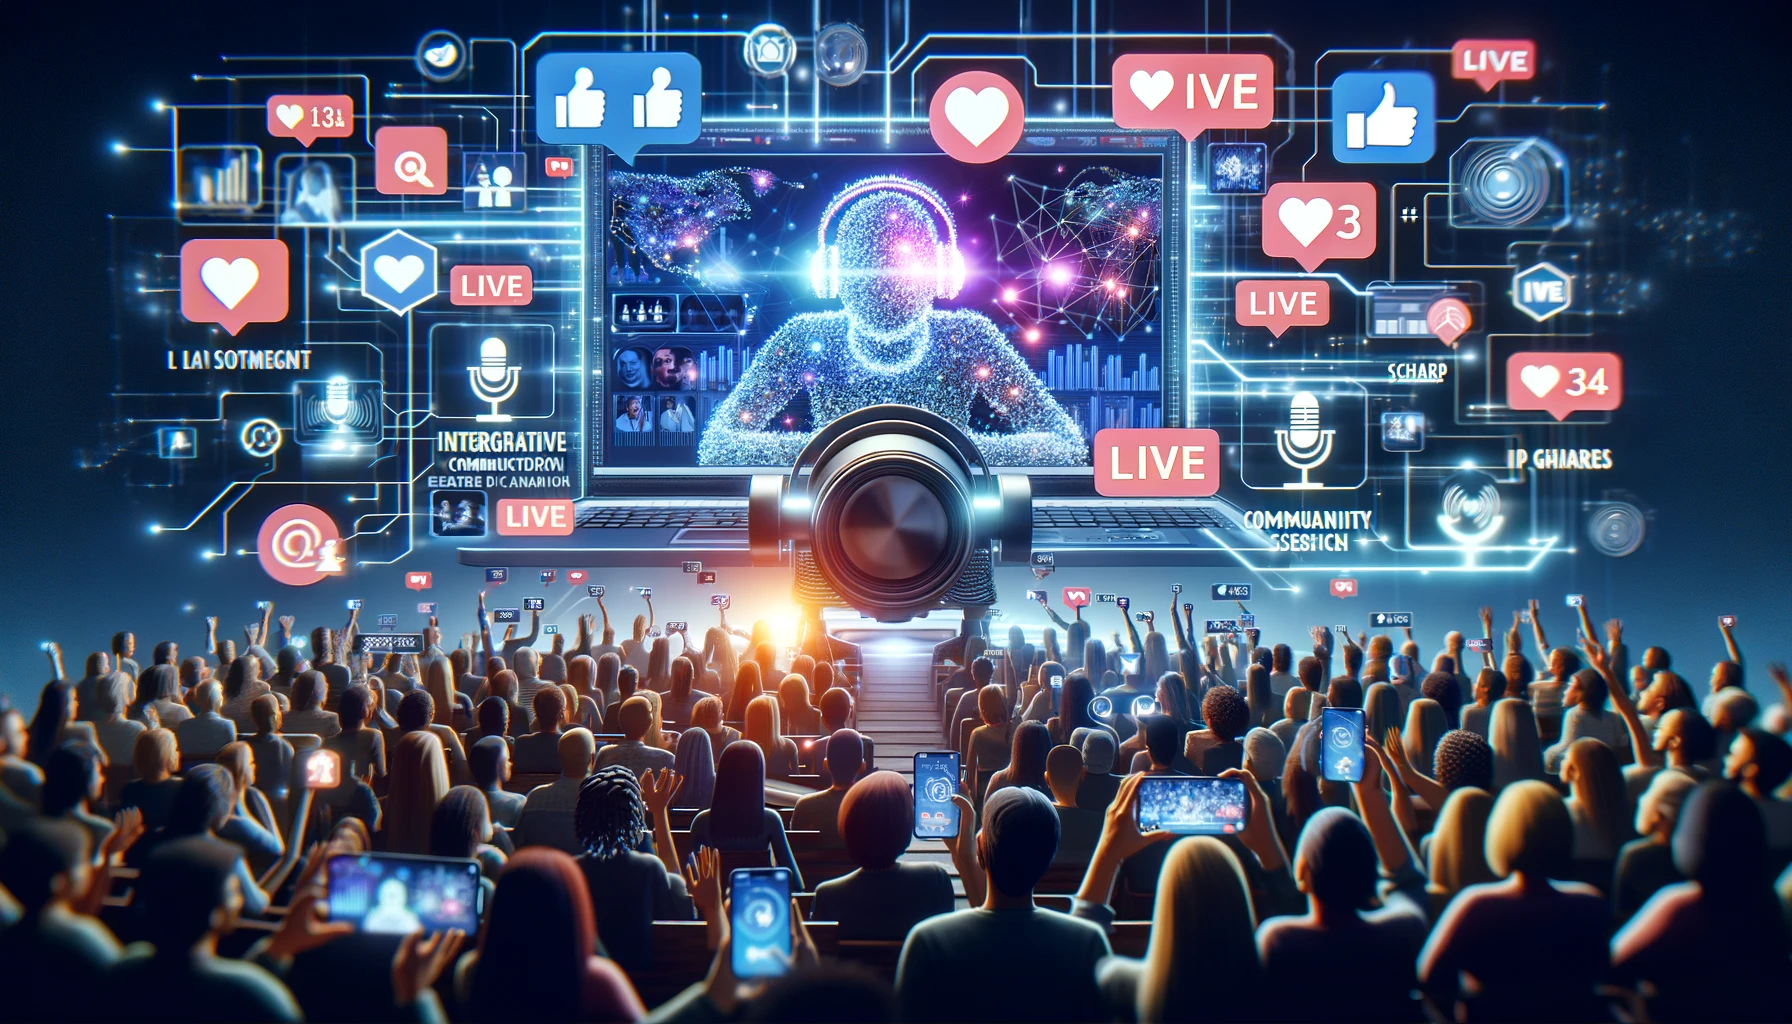 A dynamic representation of a live streaming session highlighting diverse audience interactions through likes, comments, and shares in a virtual environment, showcasing the essence of Live Streaming Engagement.